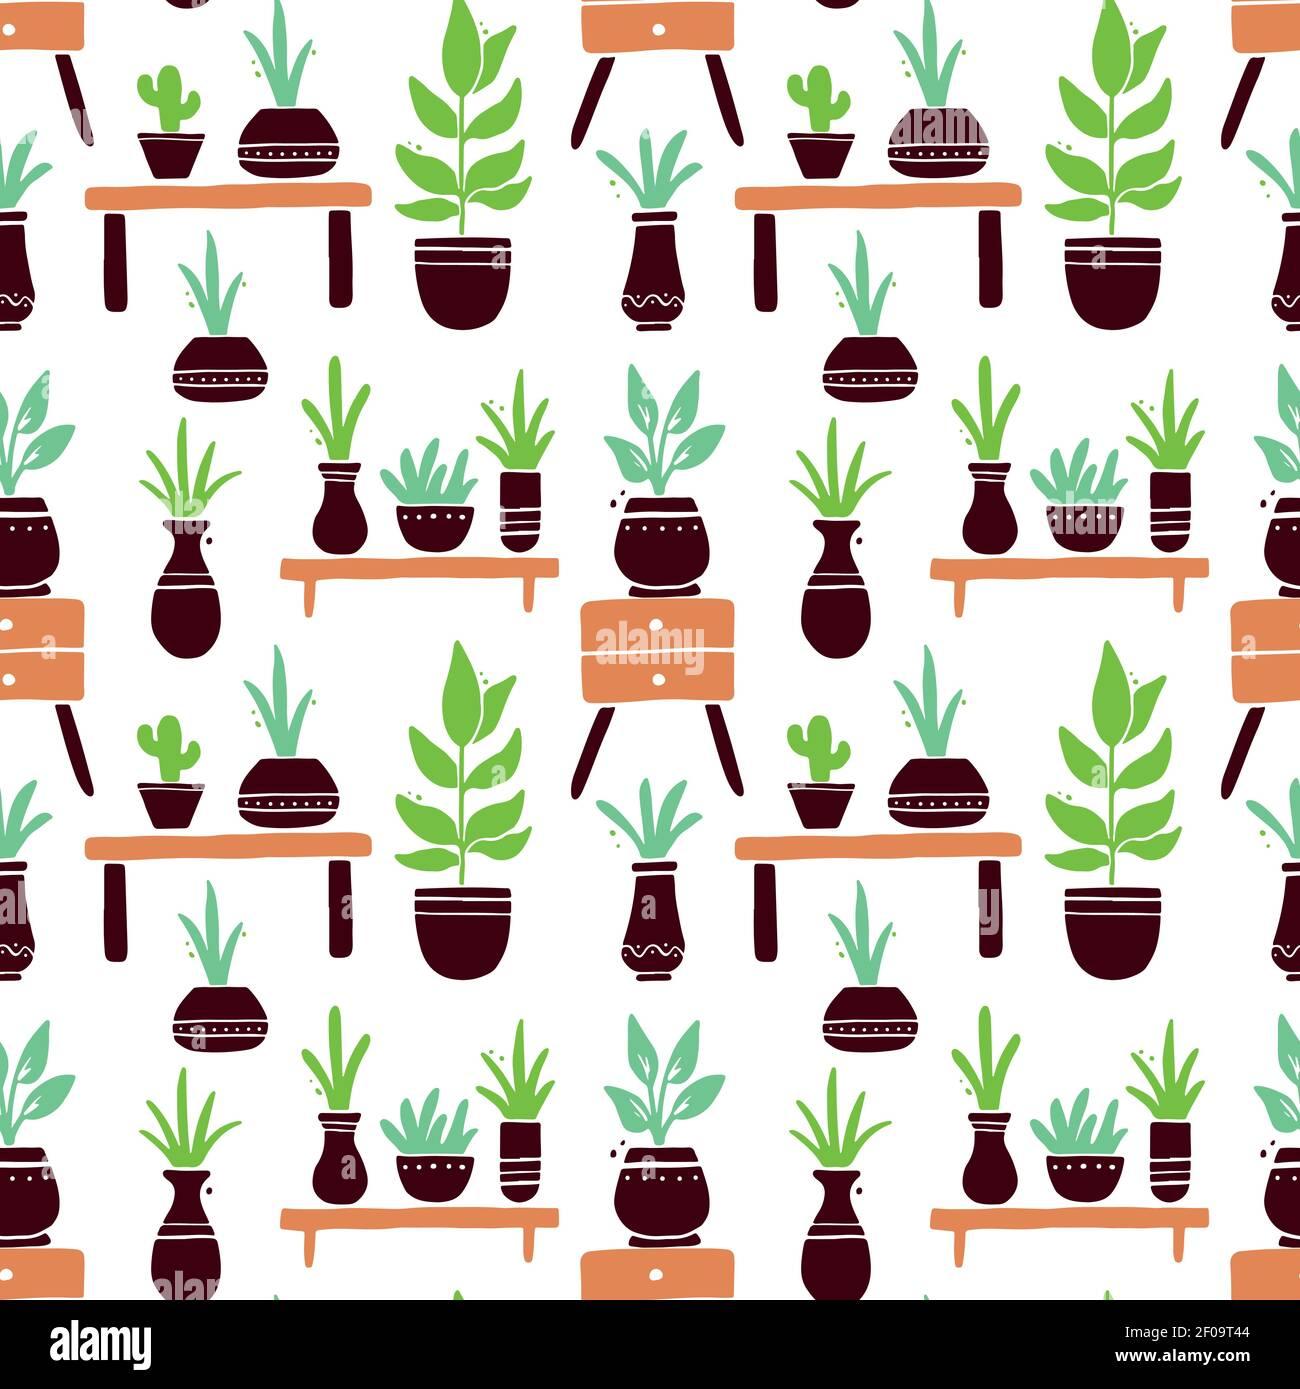 Seamless Pattern Of Cute Cartoon House Plant With Leaf And Pot